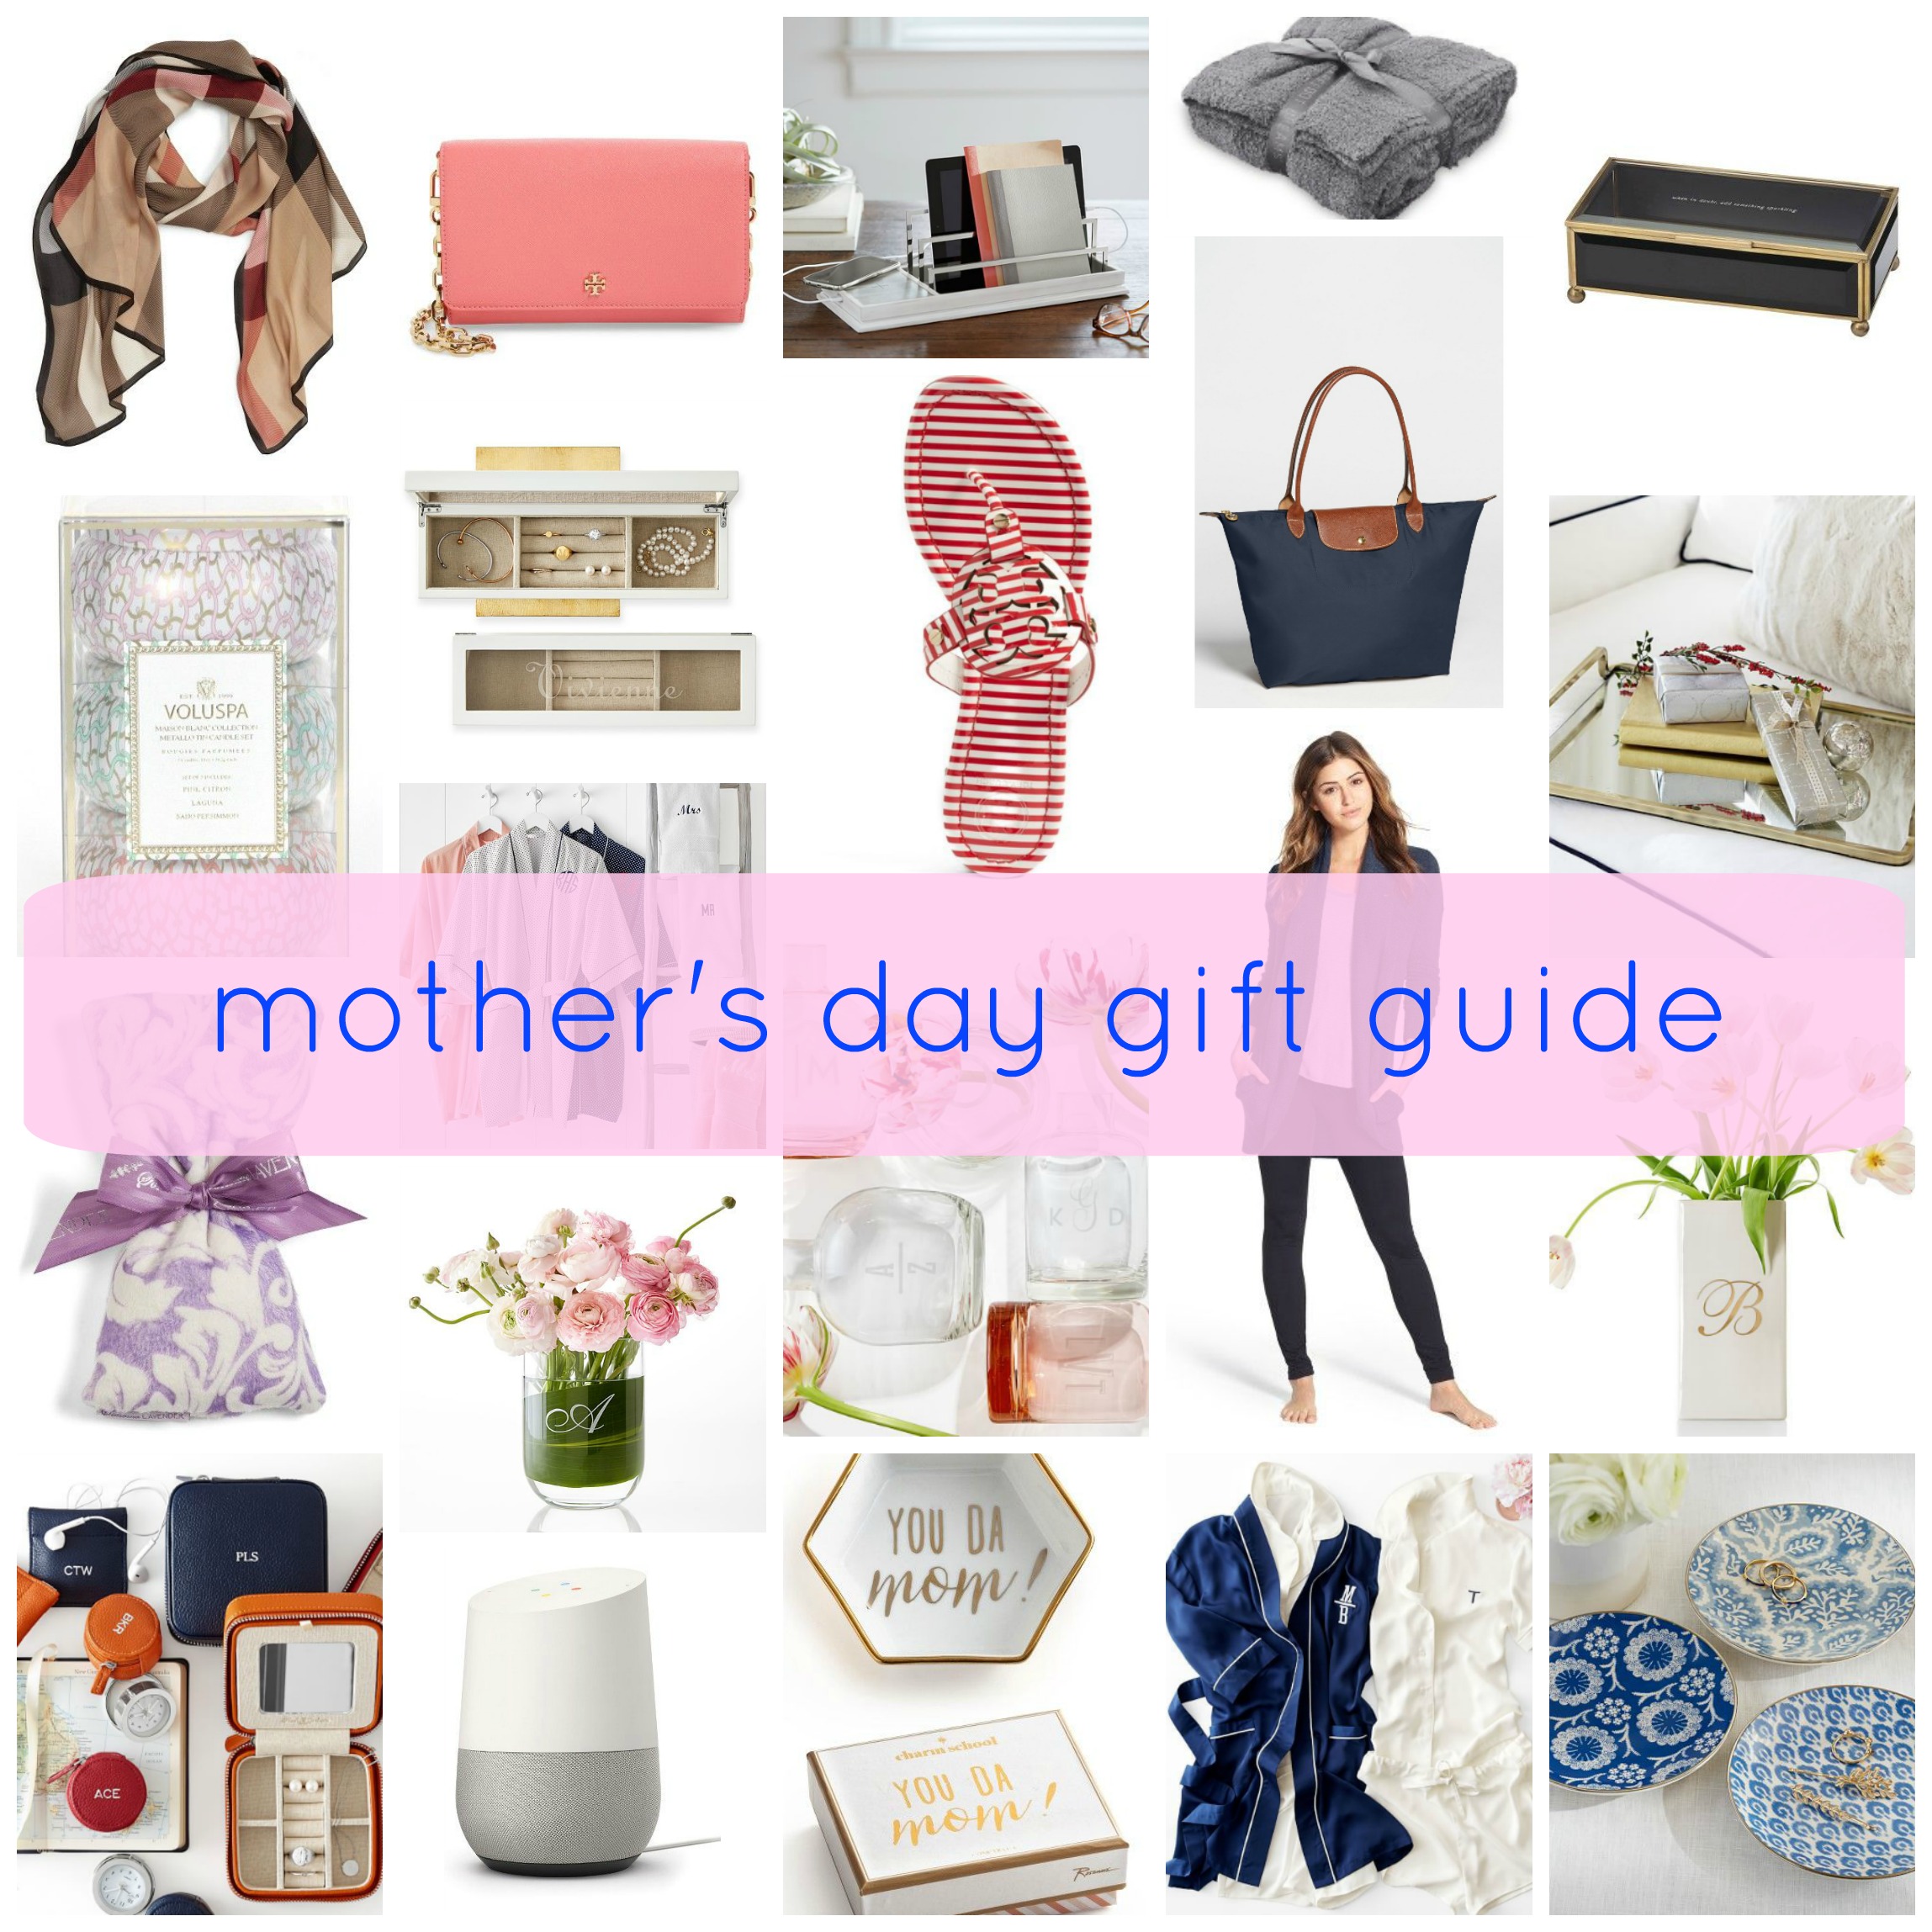 :: Mother’s Day Gift Ideas ::